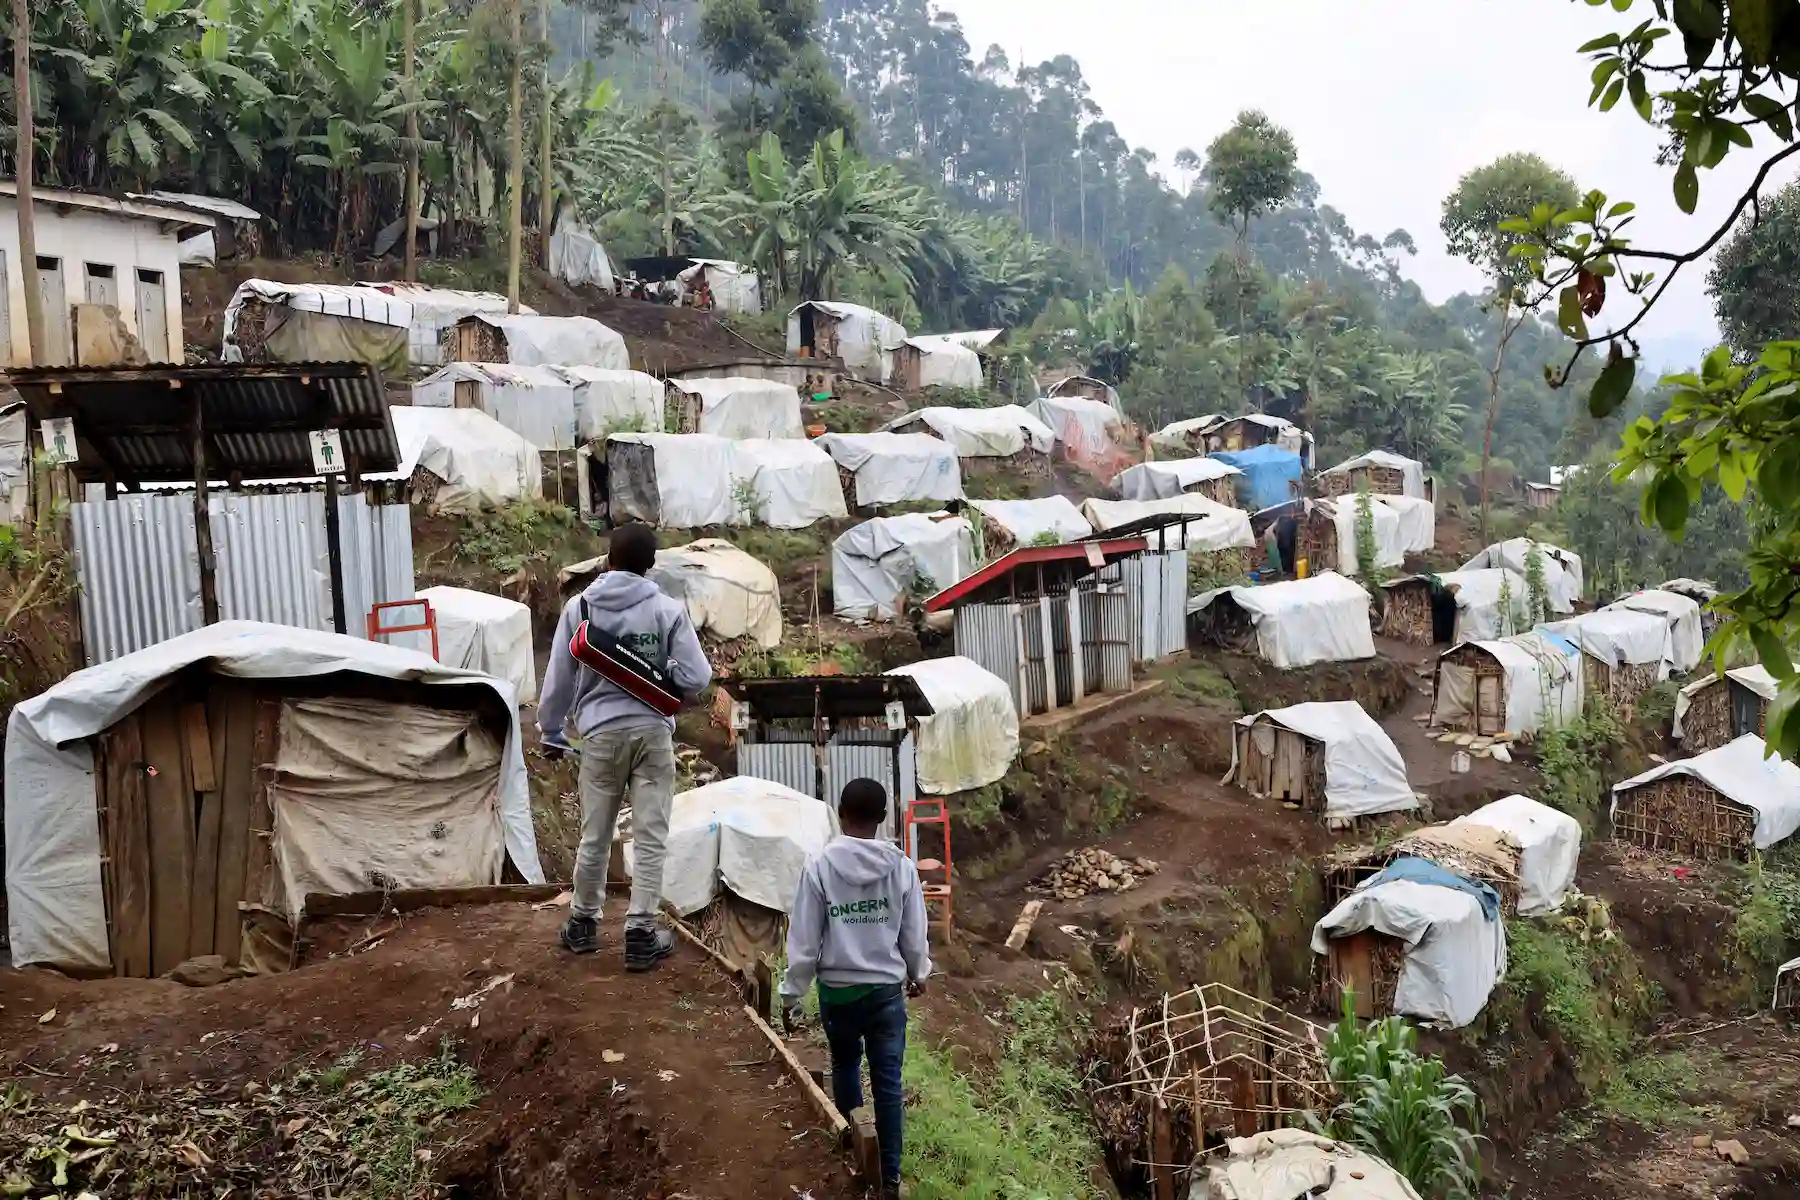 Small shelters for displaced families on a hillside in eastern DRC